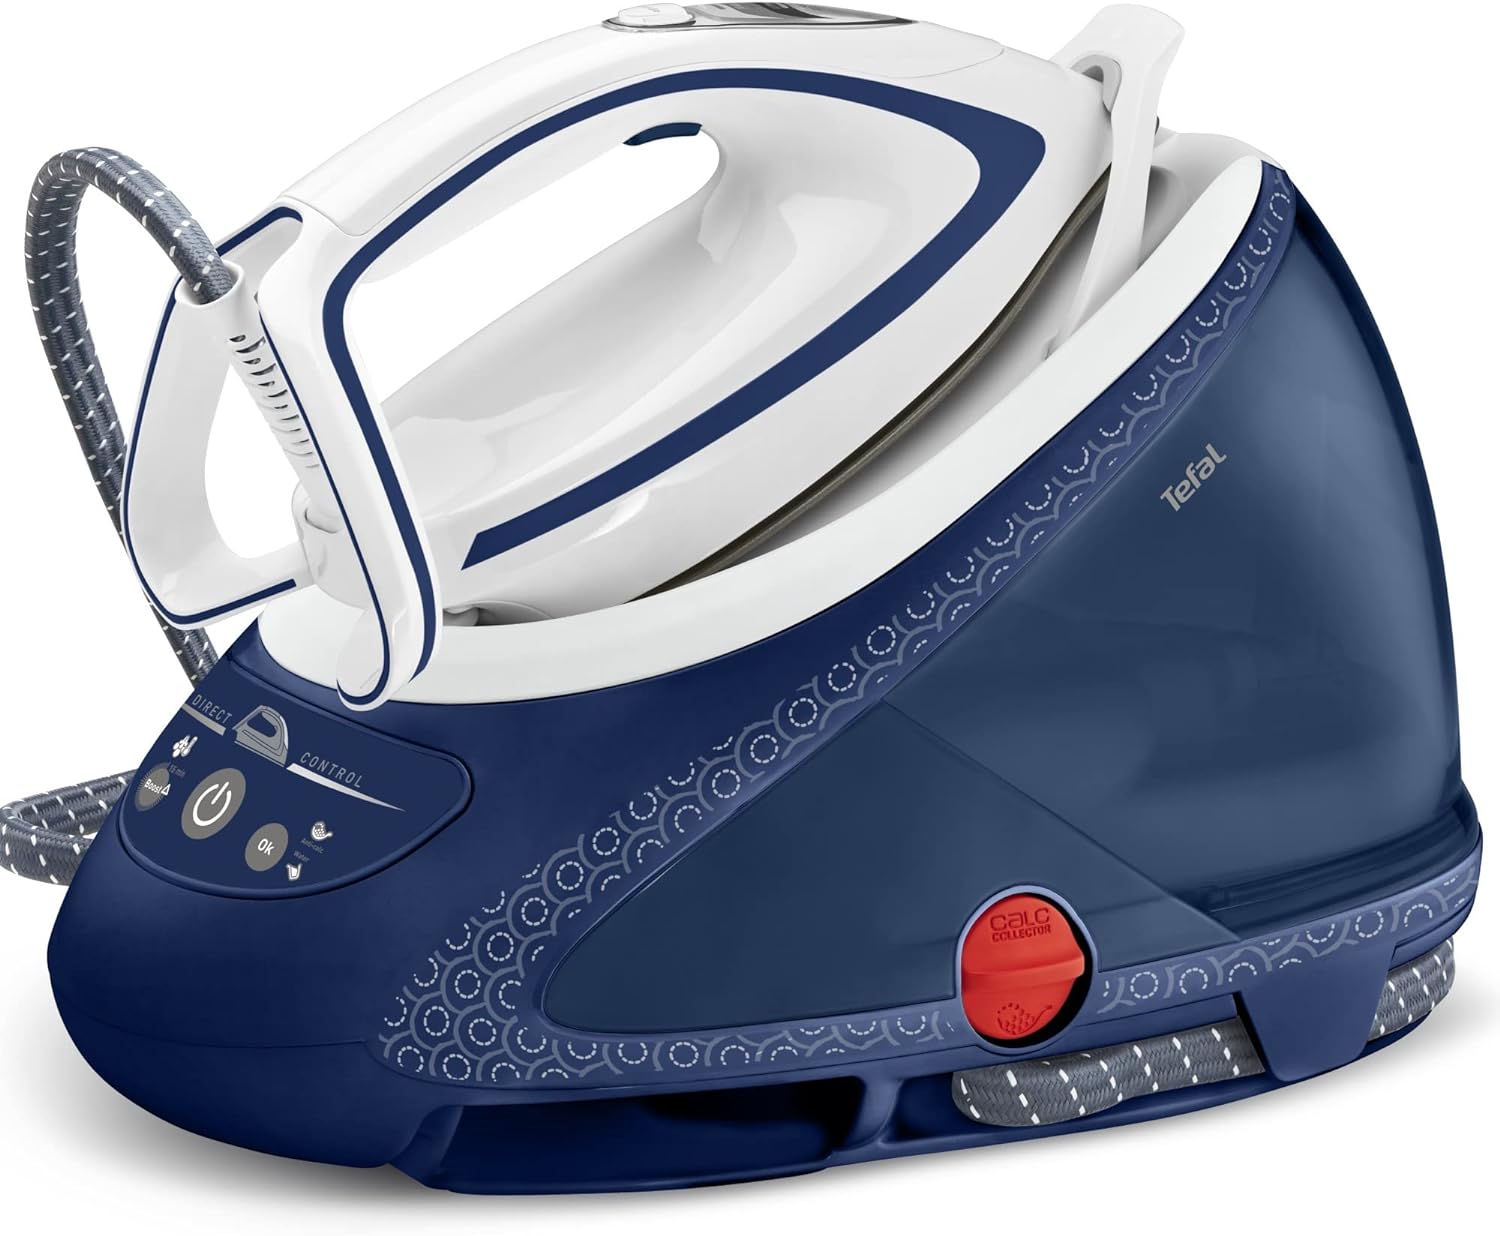 Tefal Pro Express Ultimate High Pressure Steam Generator Iron, 1.9 L Capacity, 8 Bar, 180 g/min continuous steam & 600 g/min steam boost, 2830 Watt, Removable Scale Collector, Blue & White GV9580